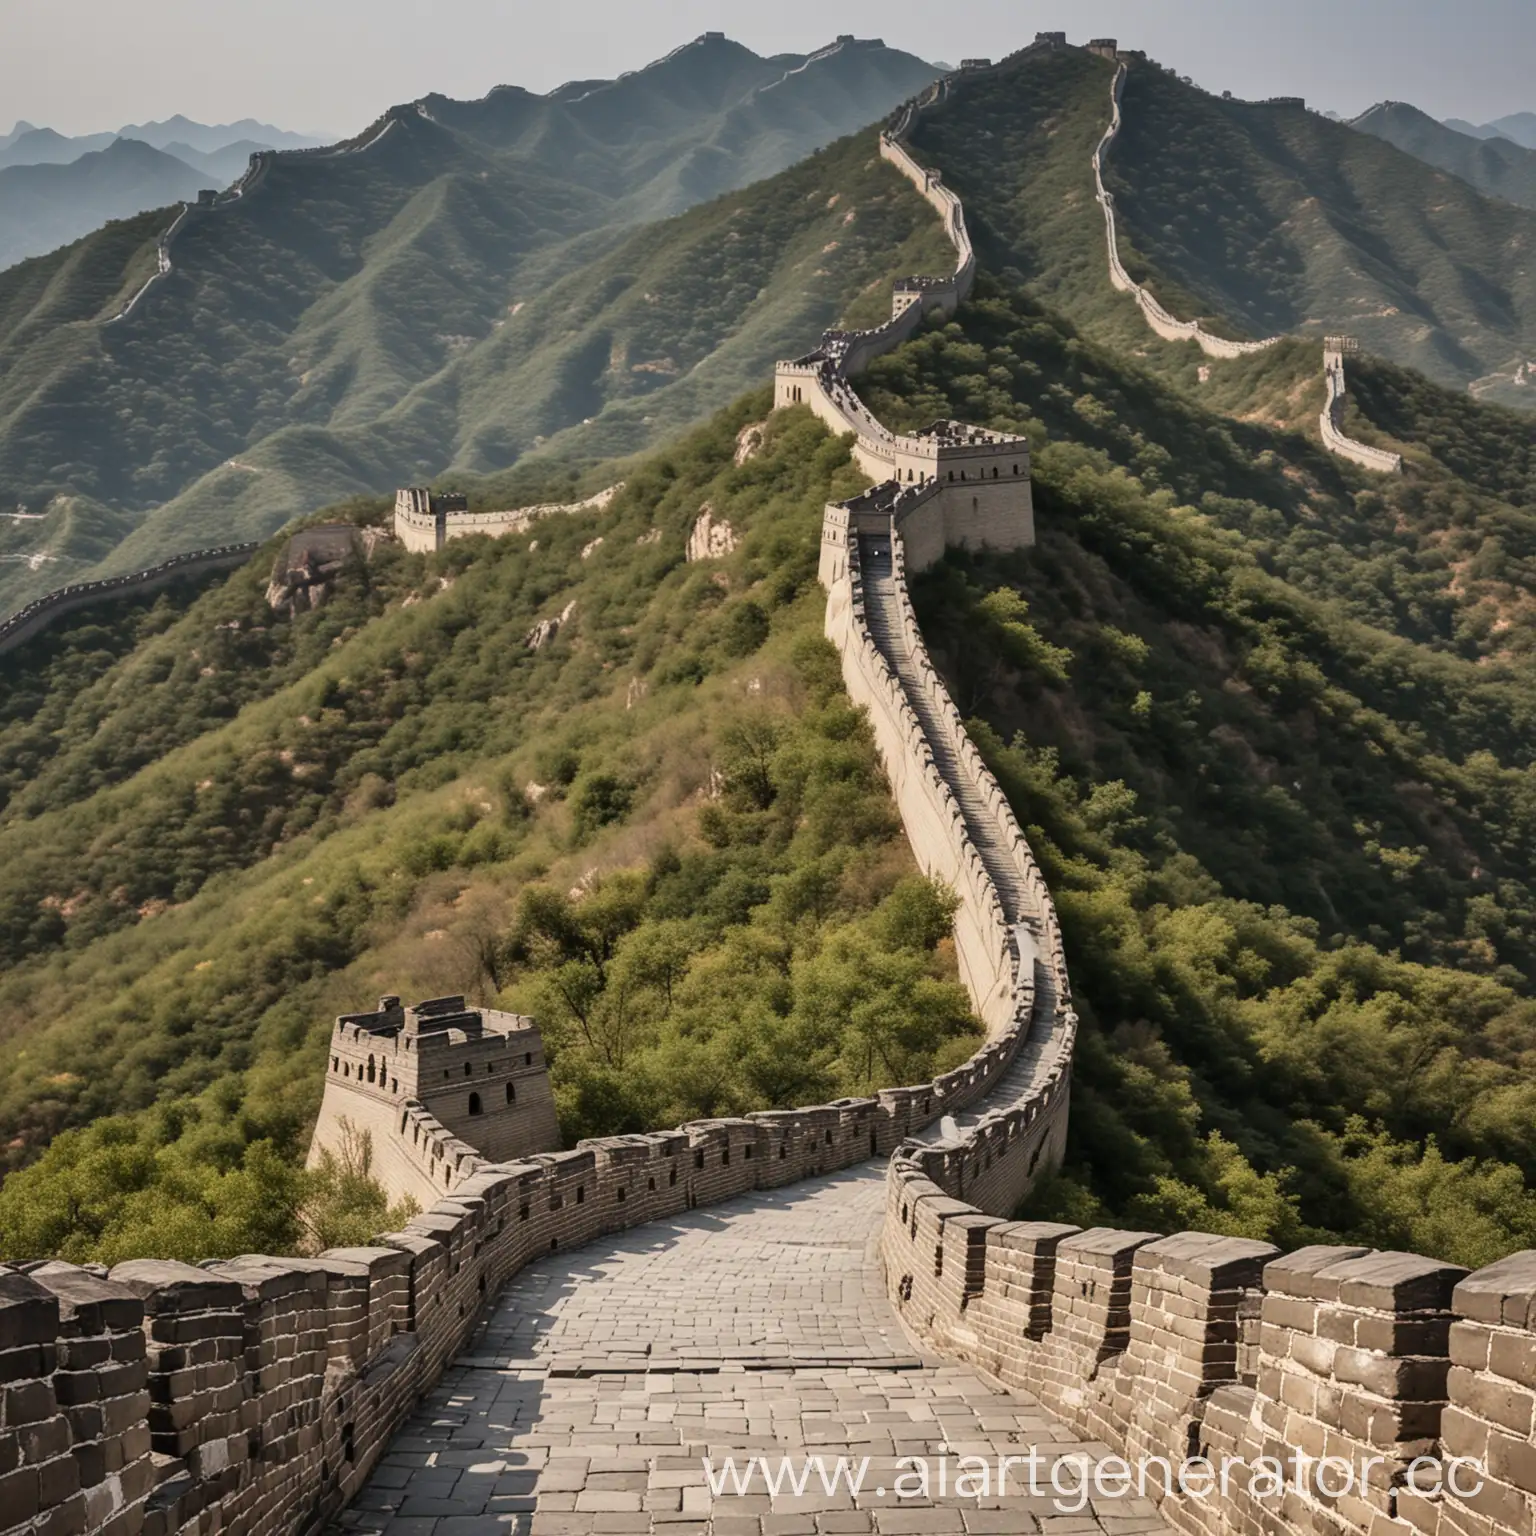 The Great Wall of China's  various sections, showcasing its magnitude and grandeur